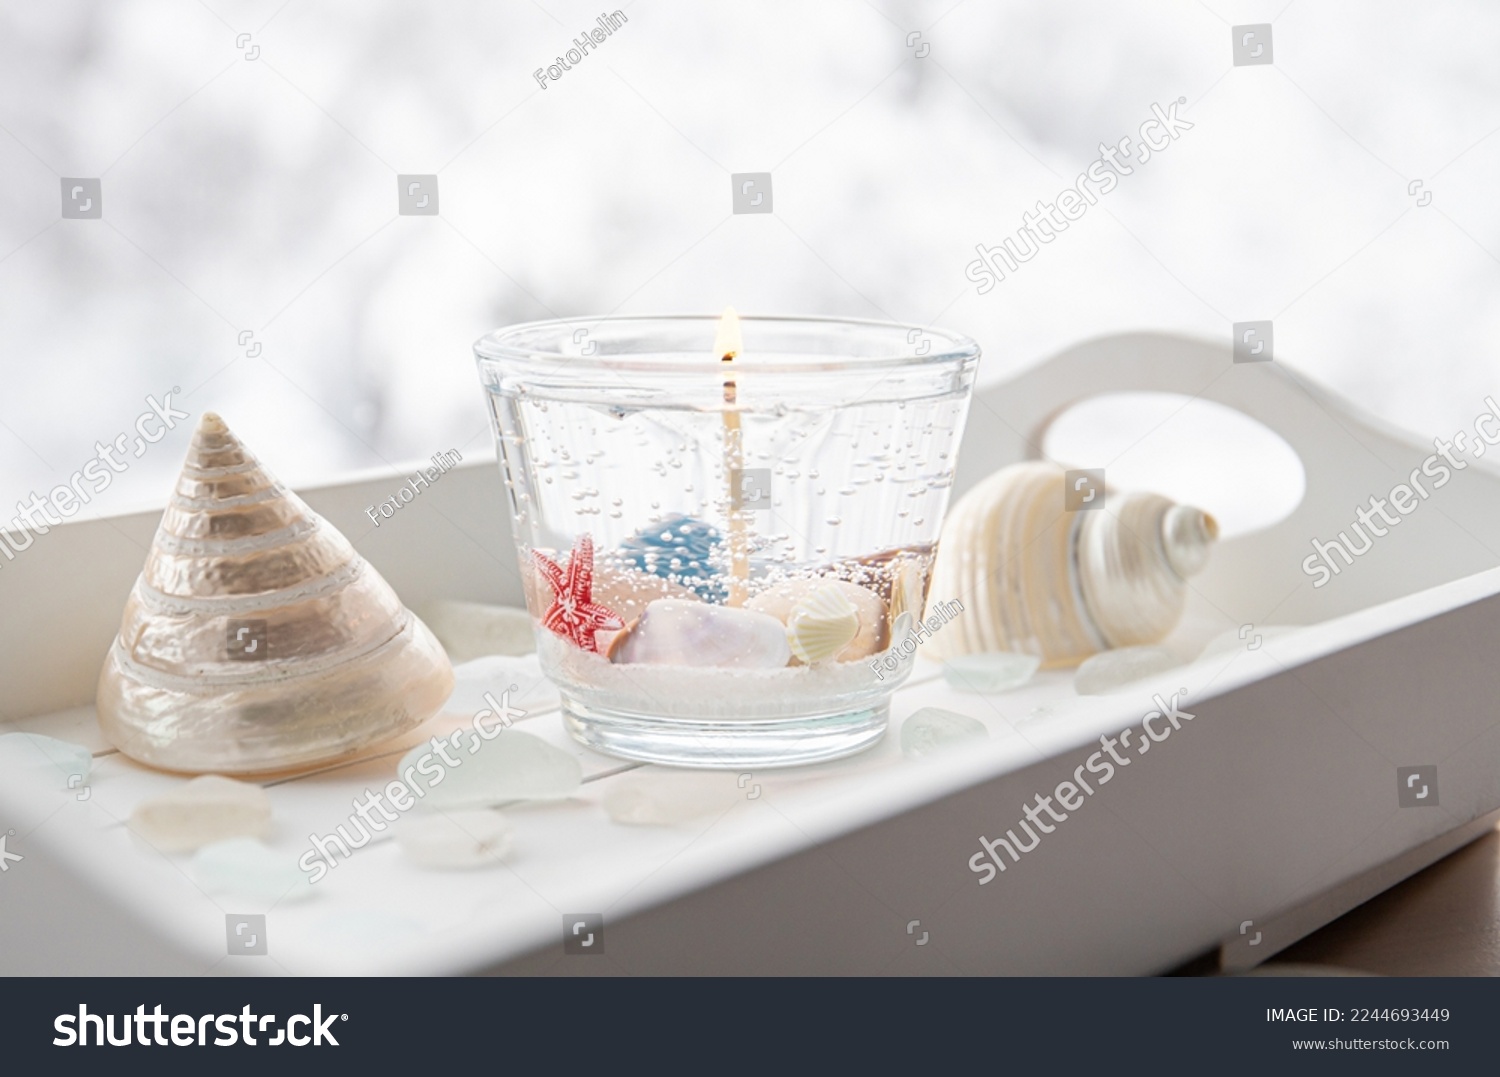 Homemade underwater seashell clear gel wax candle inside clear cup. Beautiful candle on white wood tray with sea glass and seashells on window sill at home. #2244693449